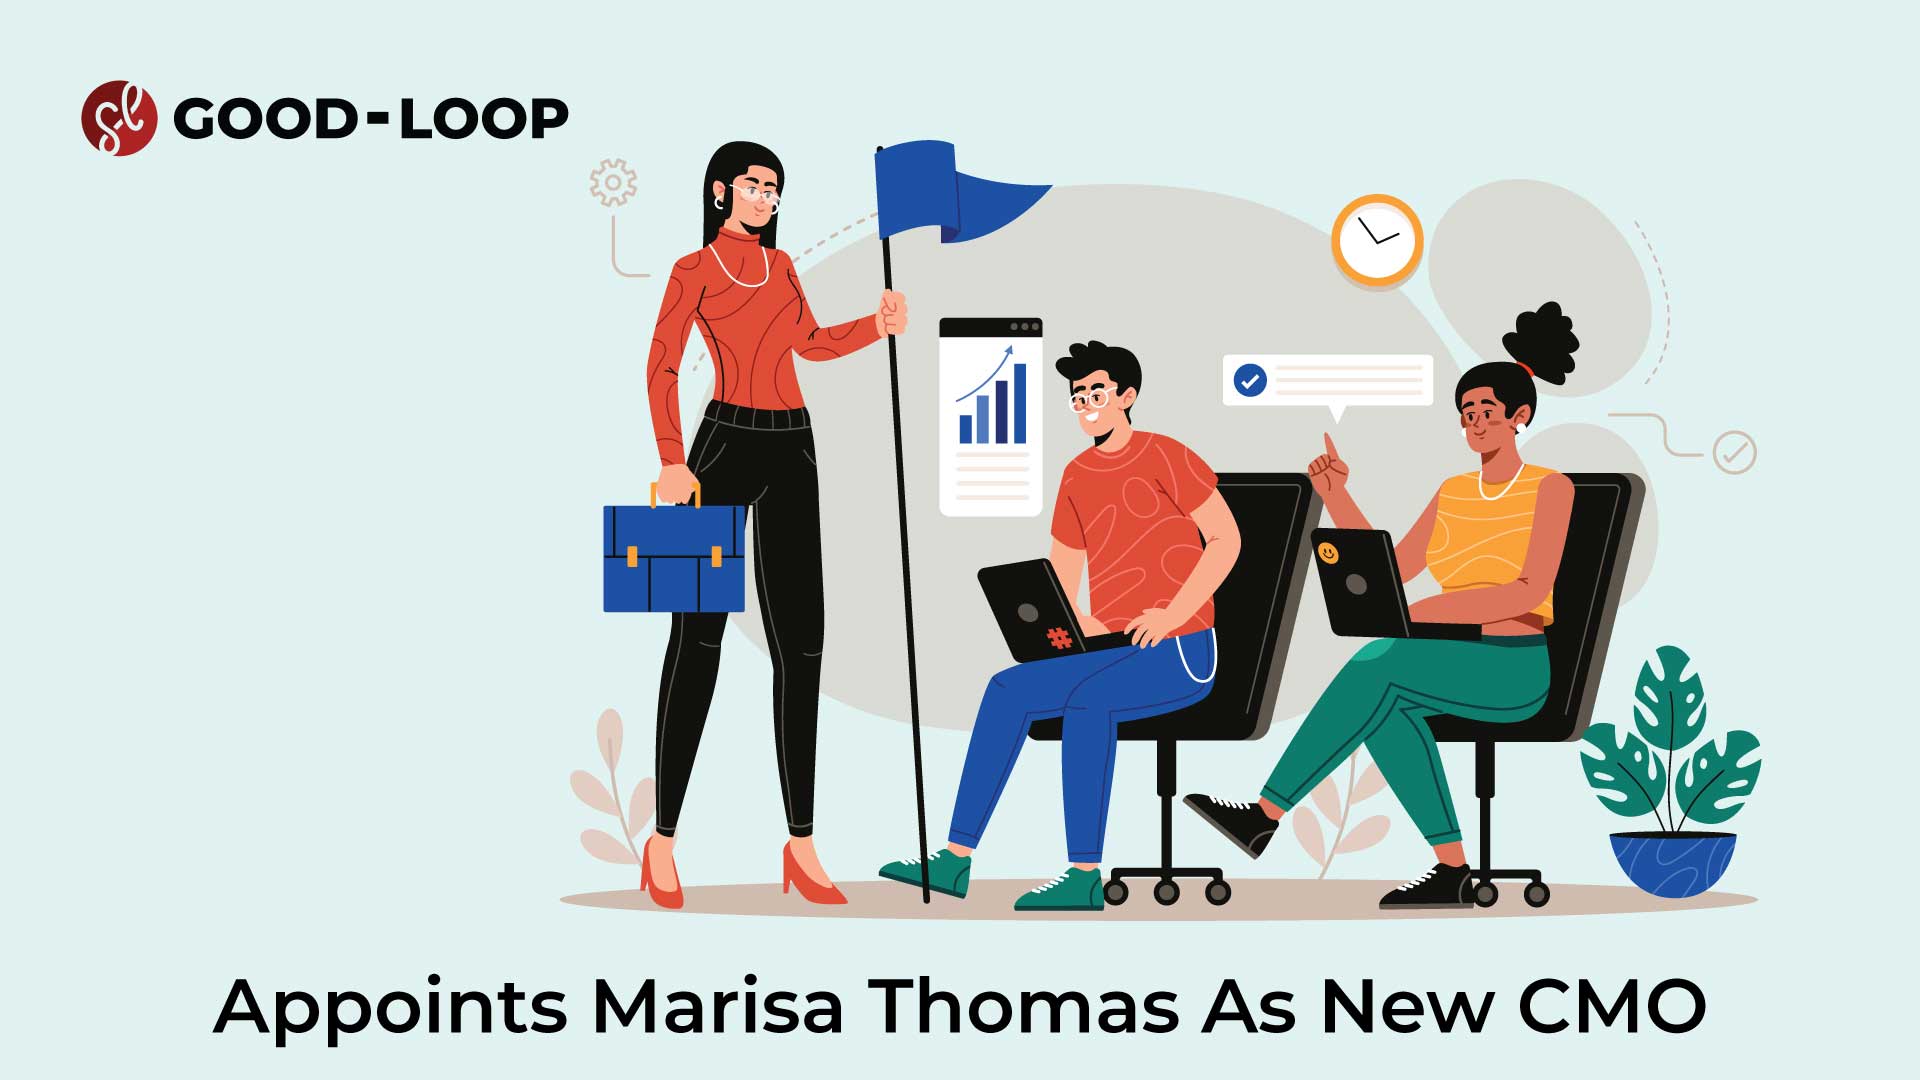 Good-Loop Appoints Former Bloom & Wild Head Of Brand Marisa Thomas As Its New CMO